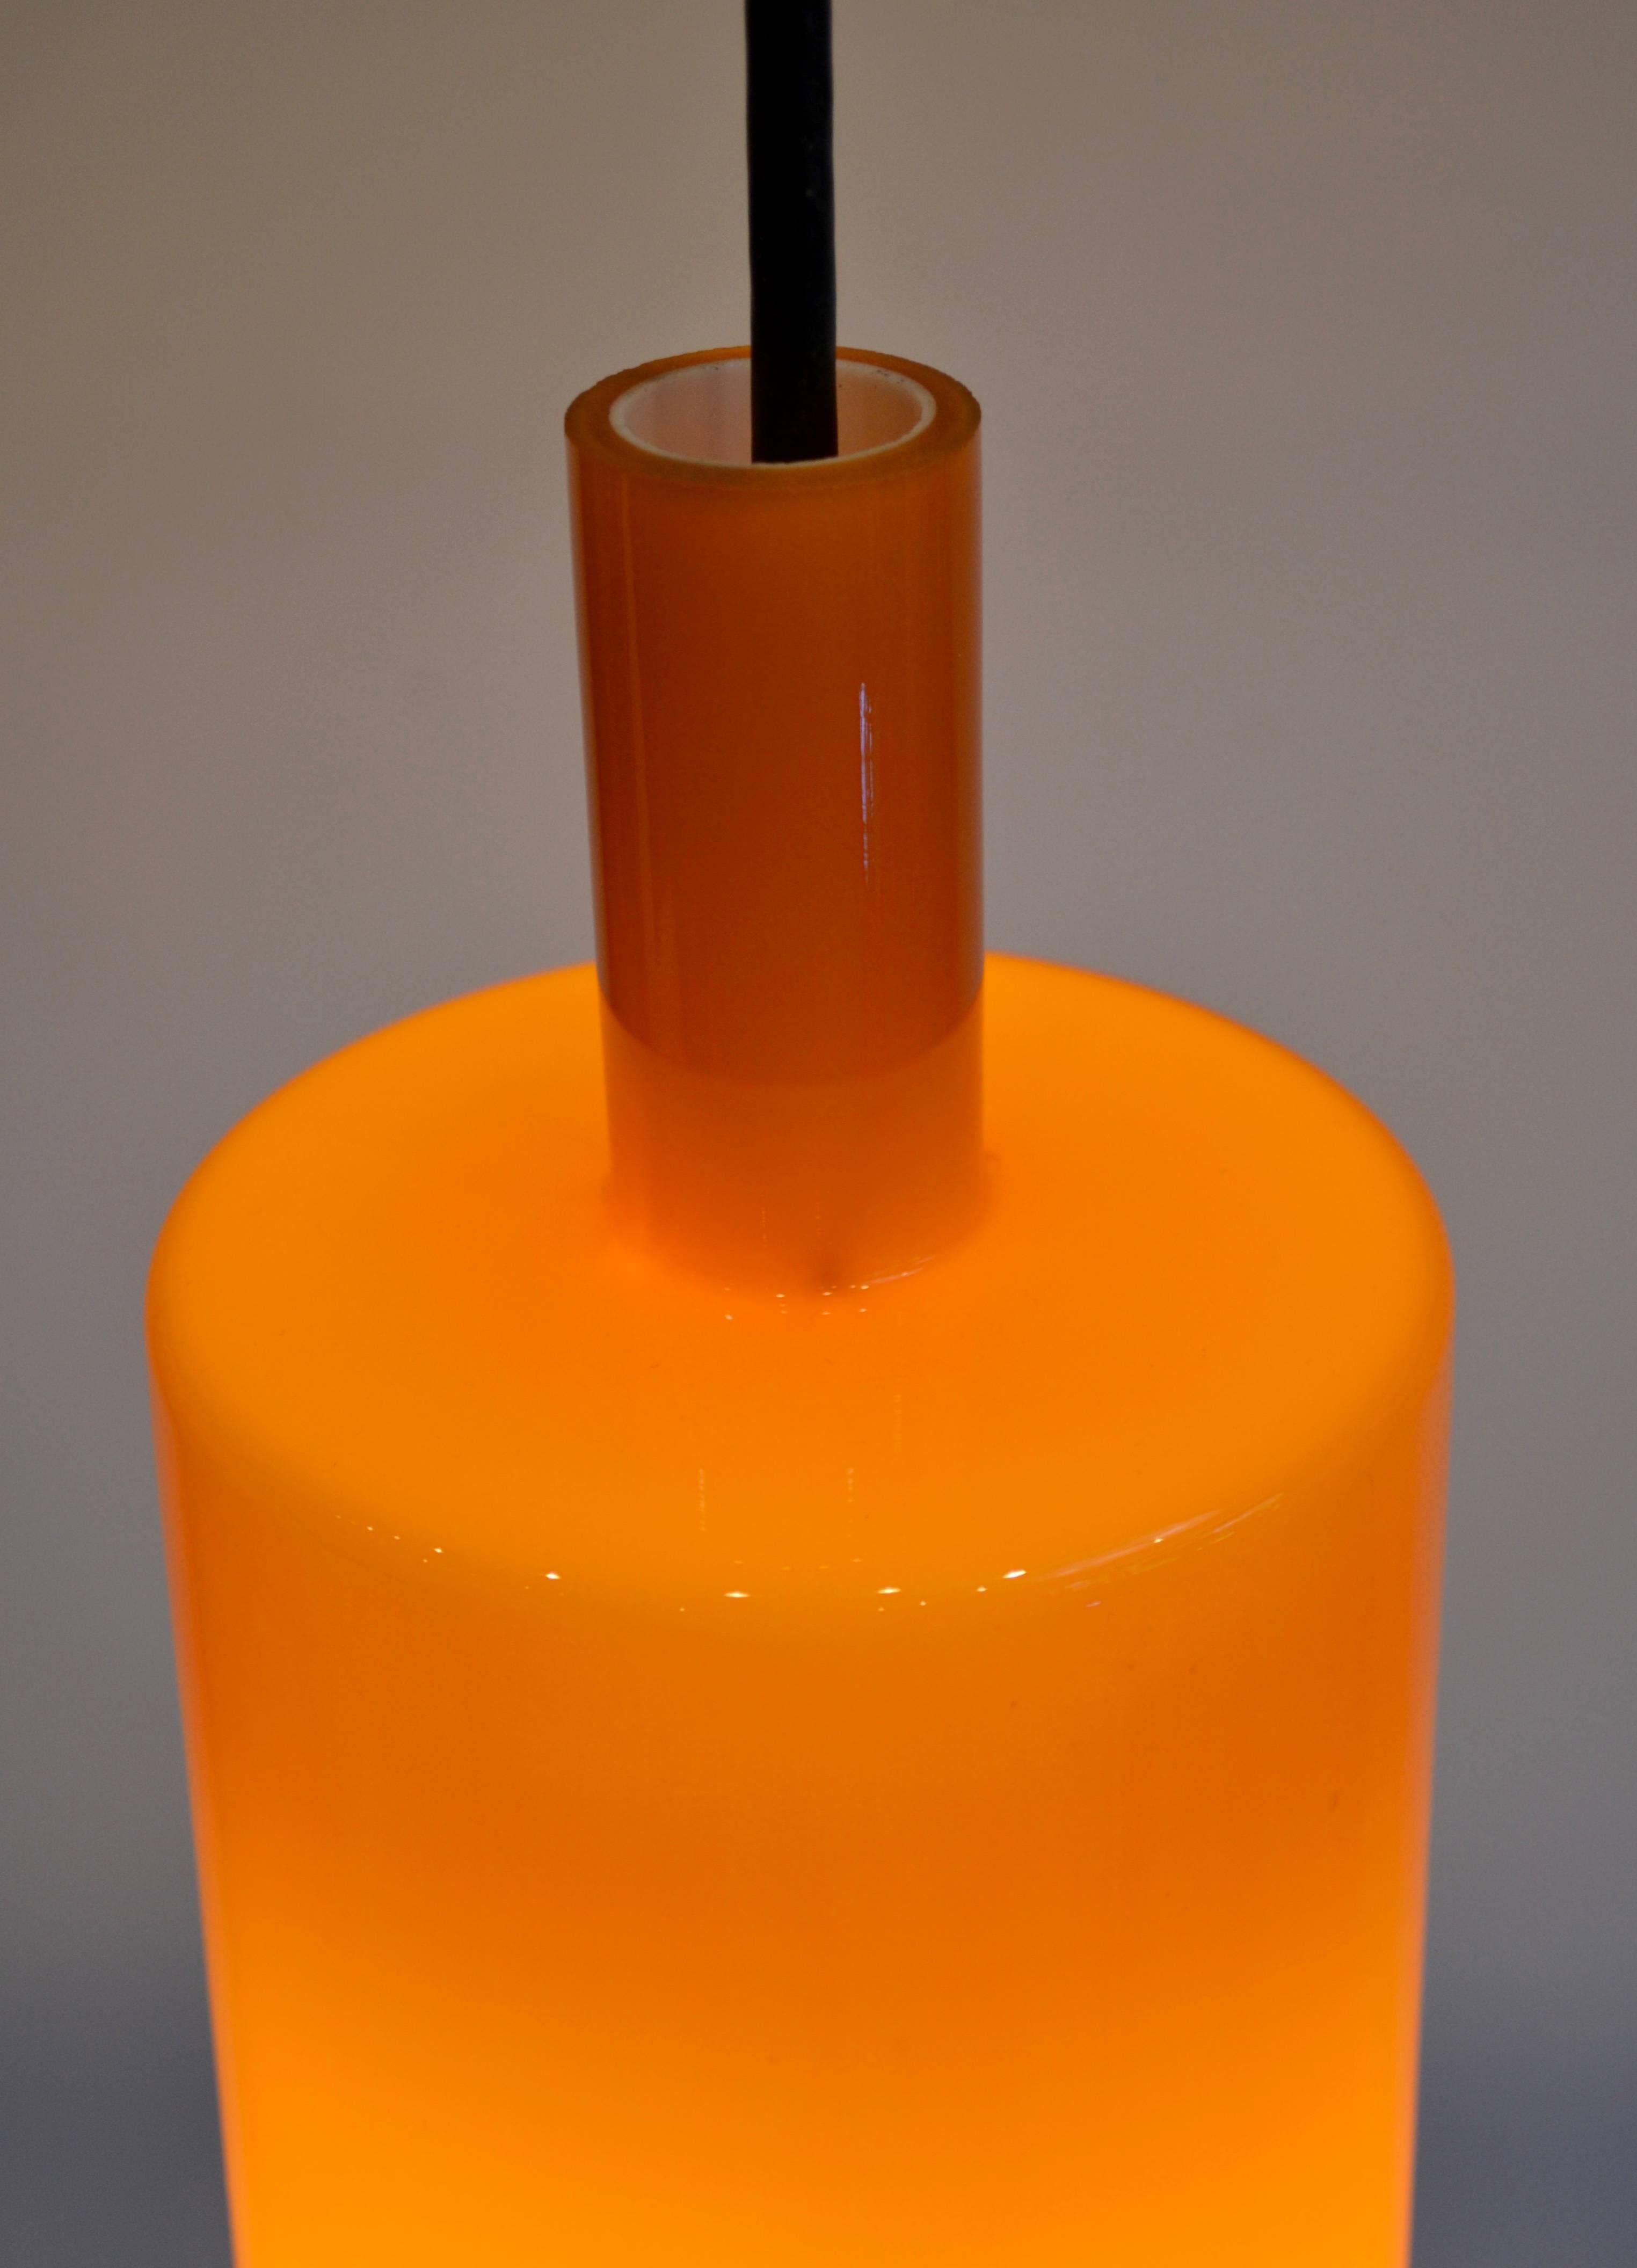 Gorgeous Danish orange glass pendant light designed by Jo Hammerborg for Fog and Mørup. In 1968 this light was shown in the catalogue of F and M. The glass has an opaline inside that spreads and softens the light.